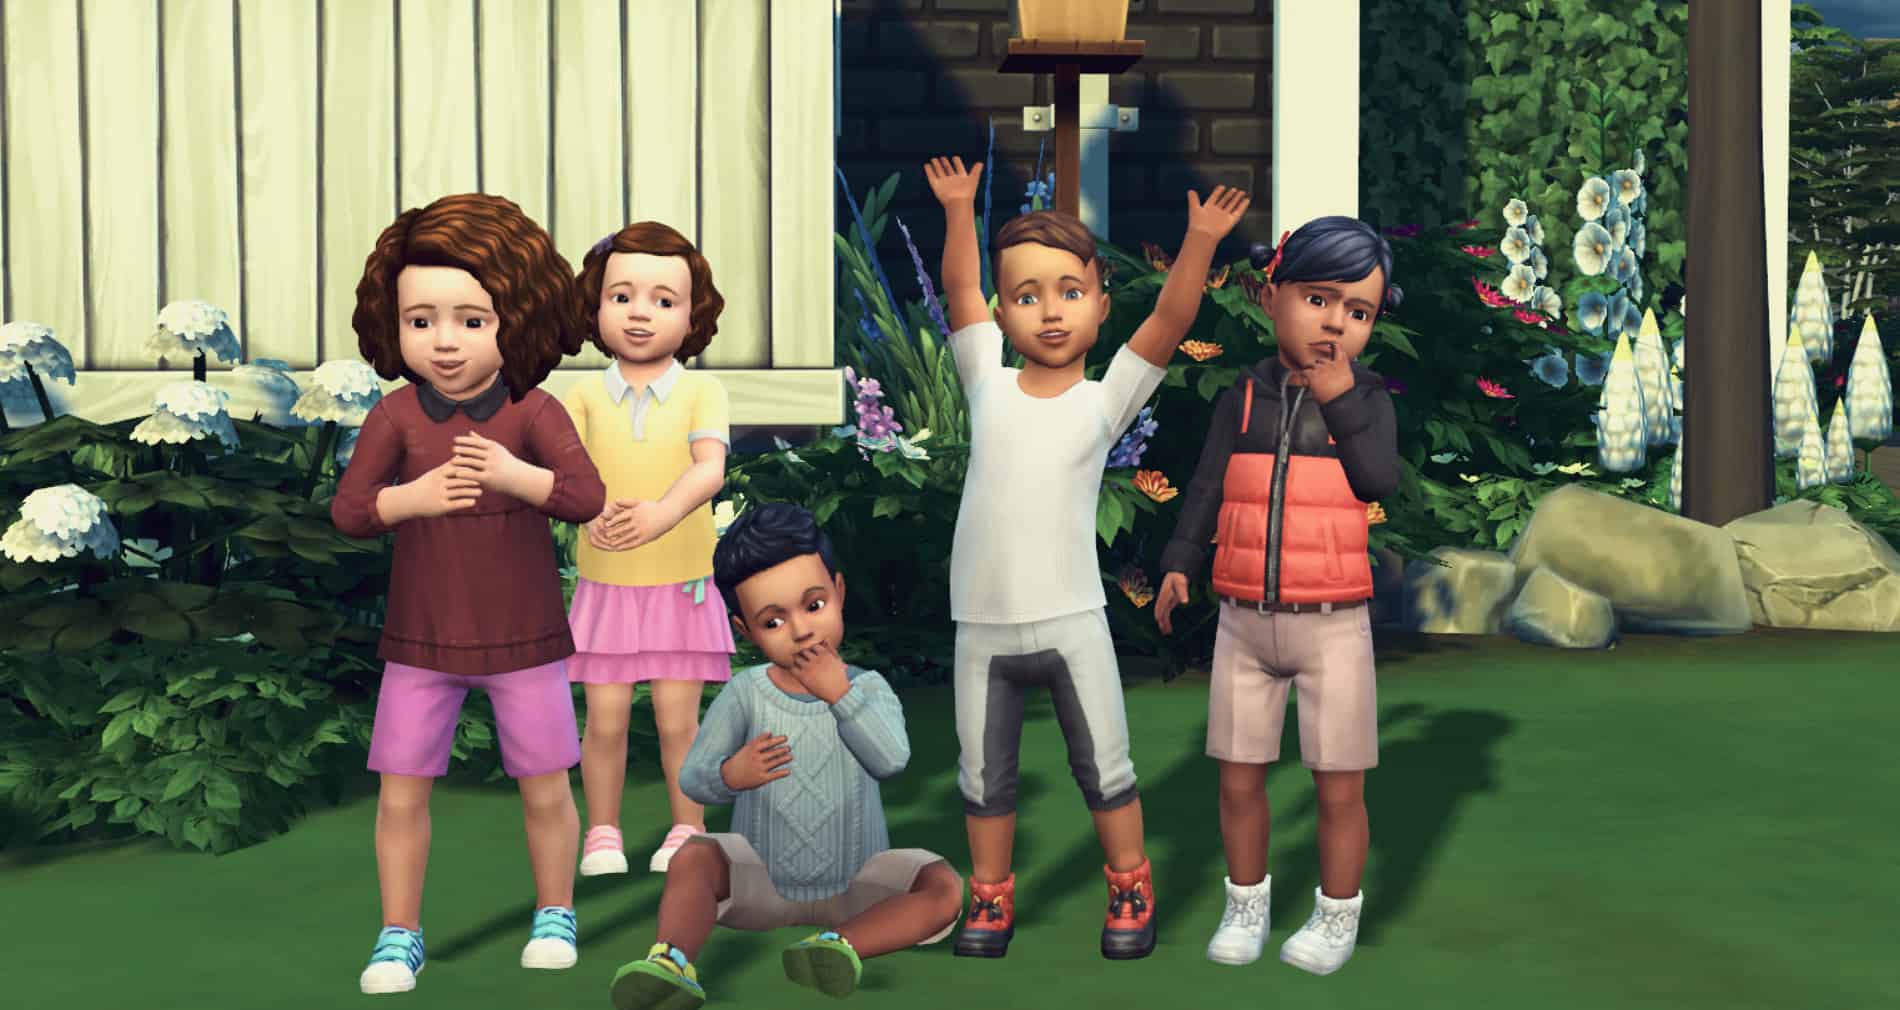 Sims 4 adds limited time Too Many Toddlers Scenario to the game